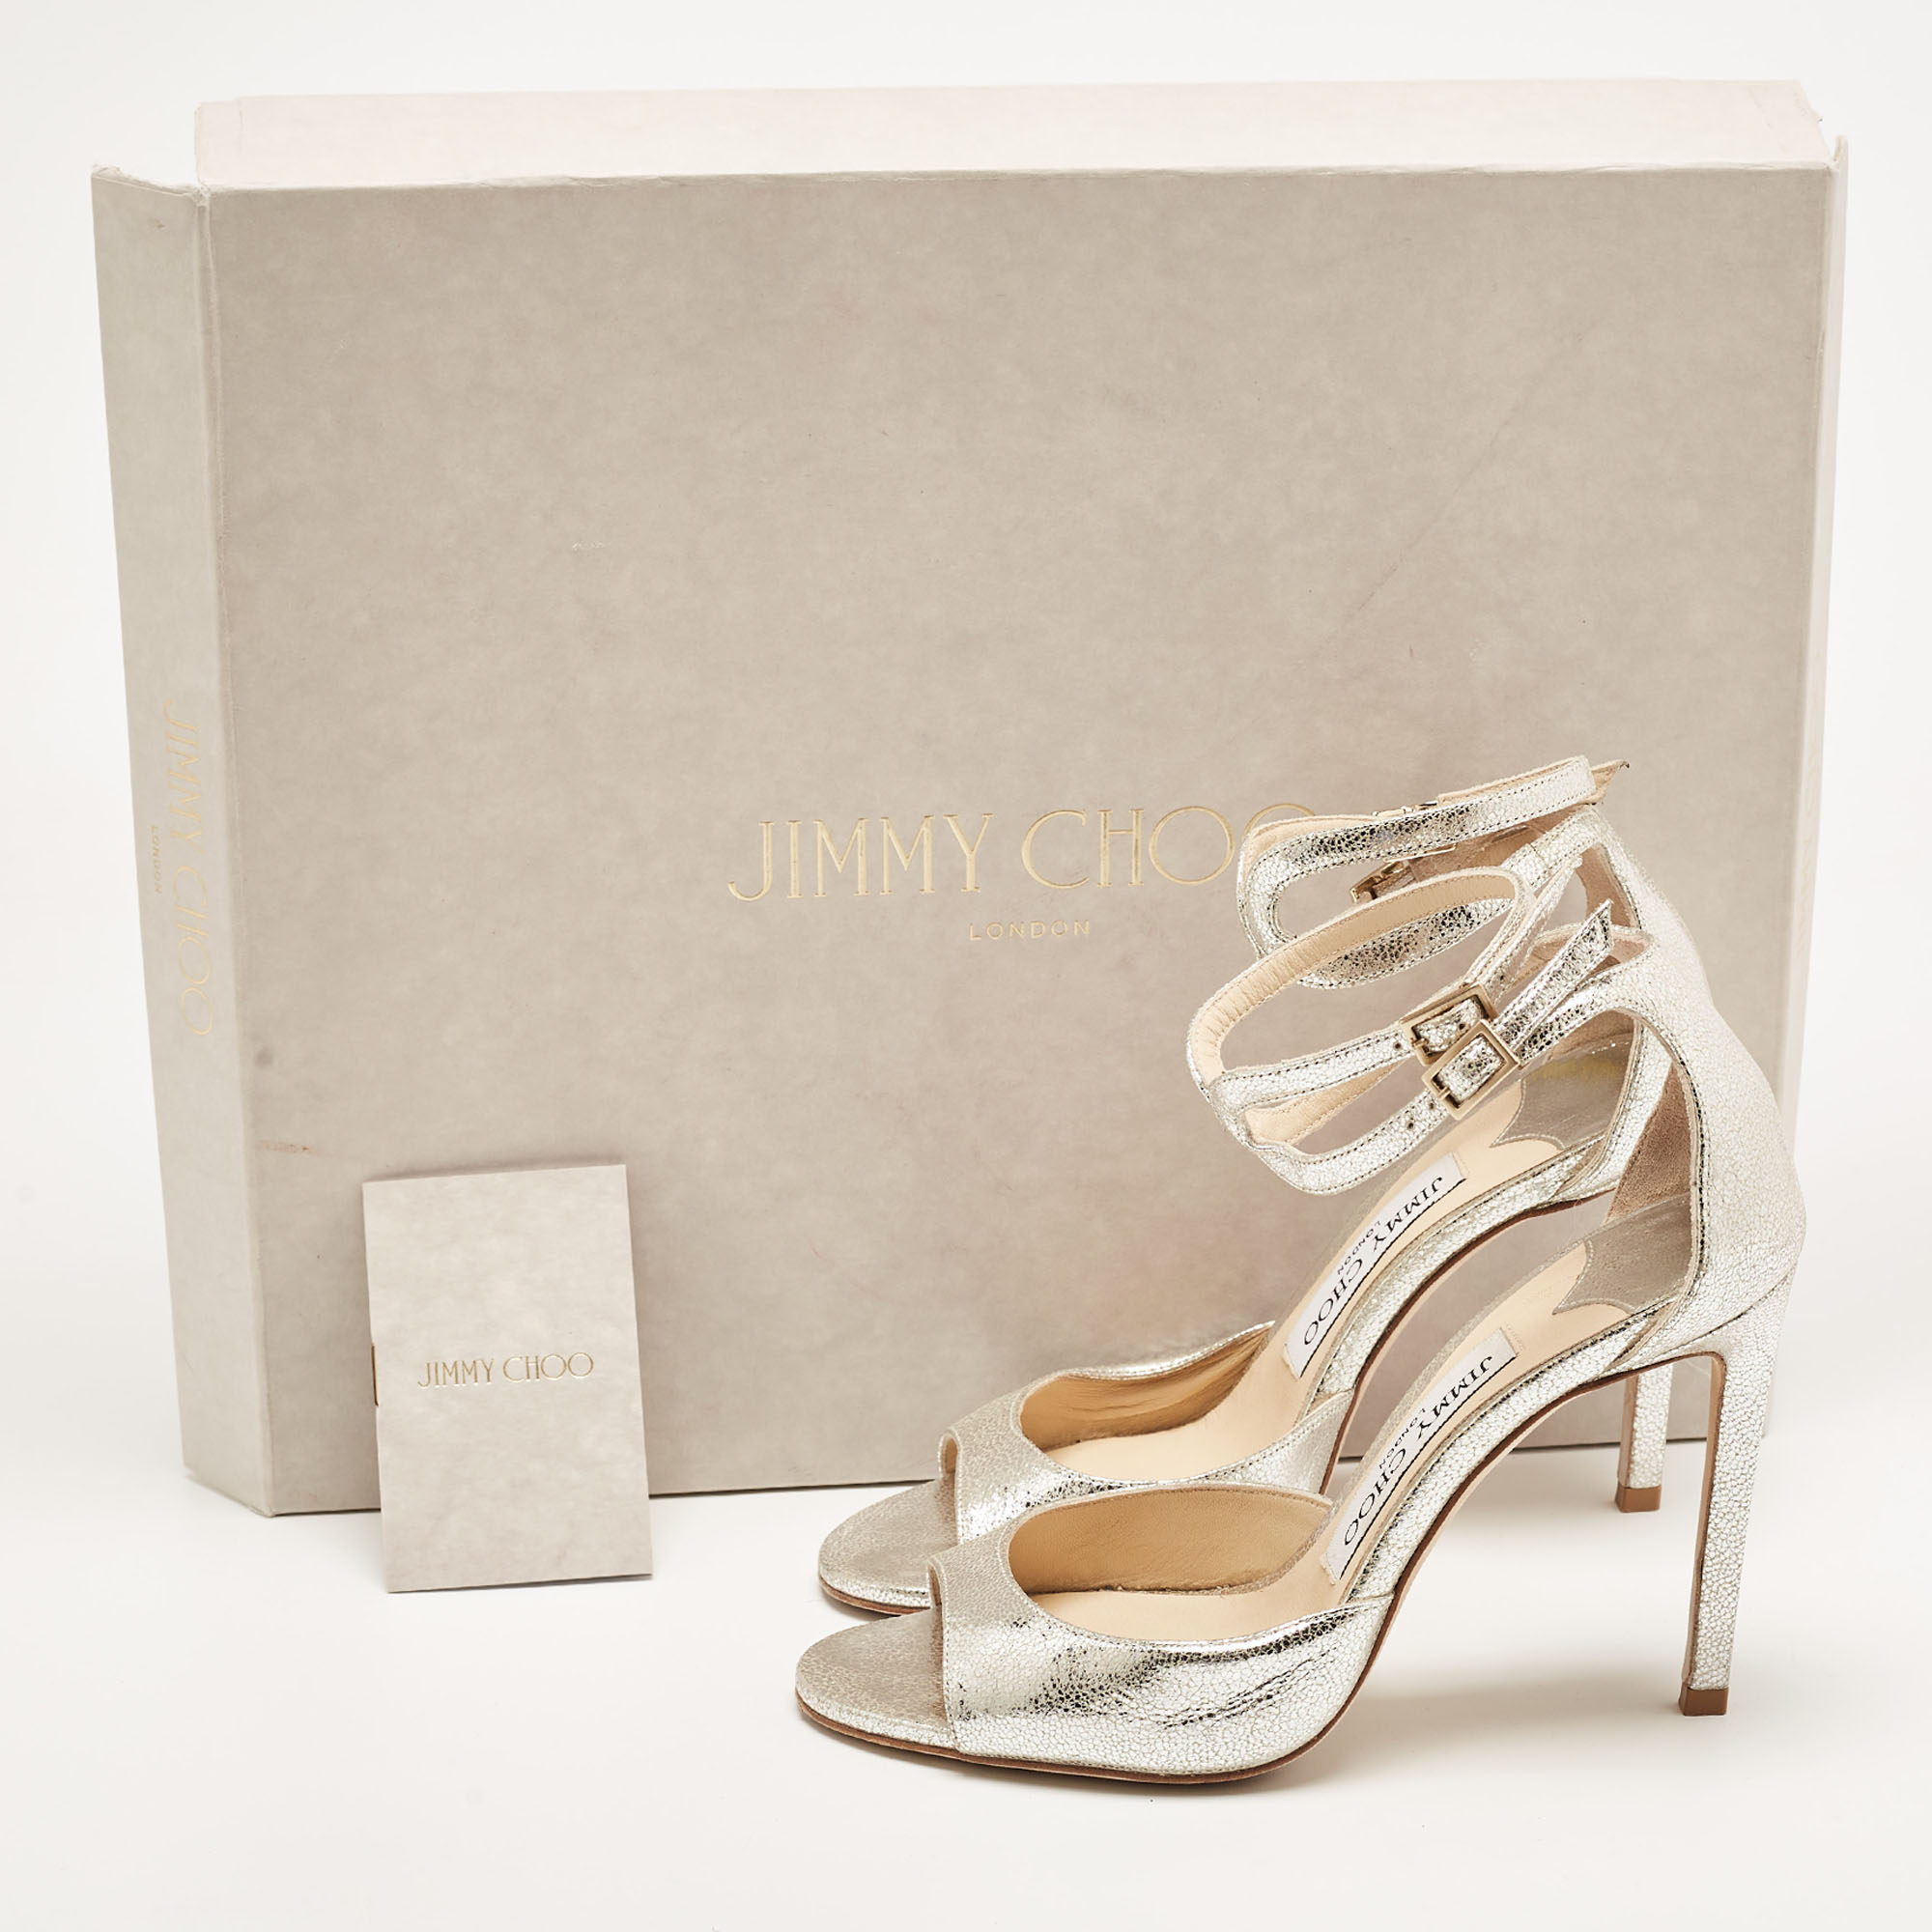 Jimmy Choo Silver Crackled Patent Leather Lane Sandals Size 35